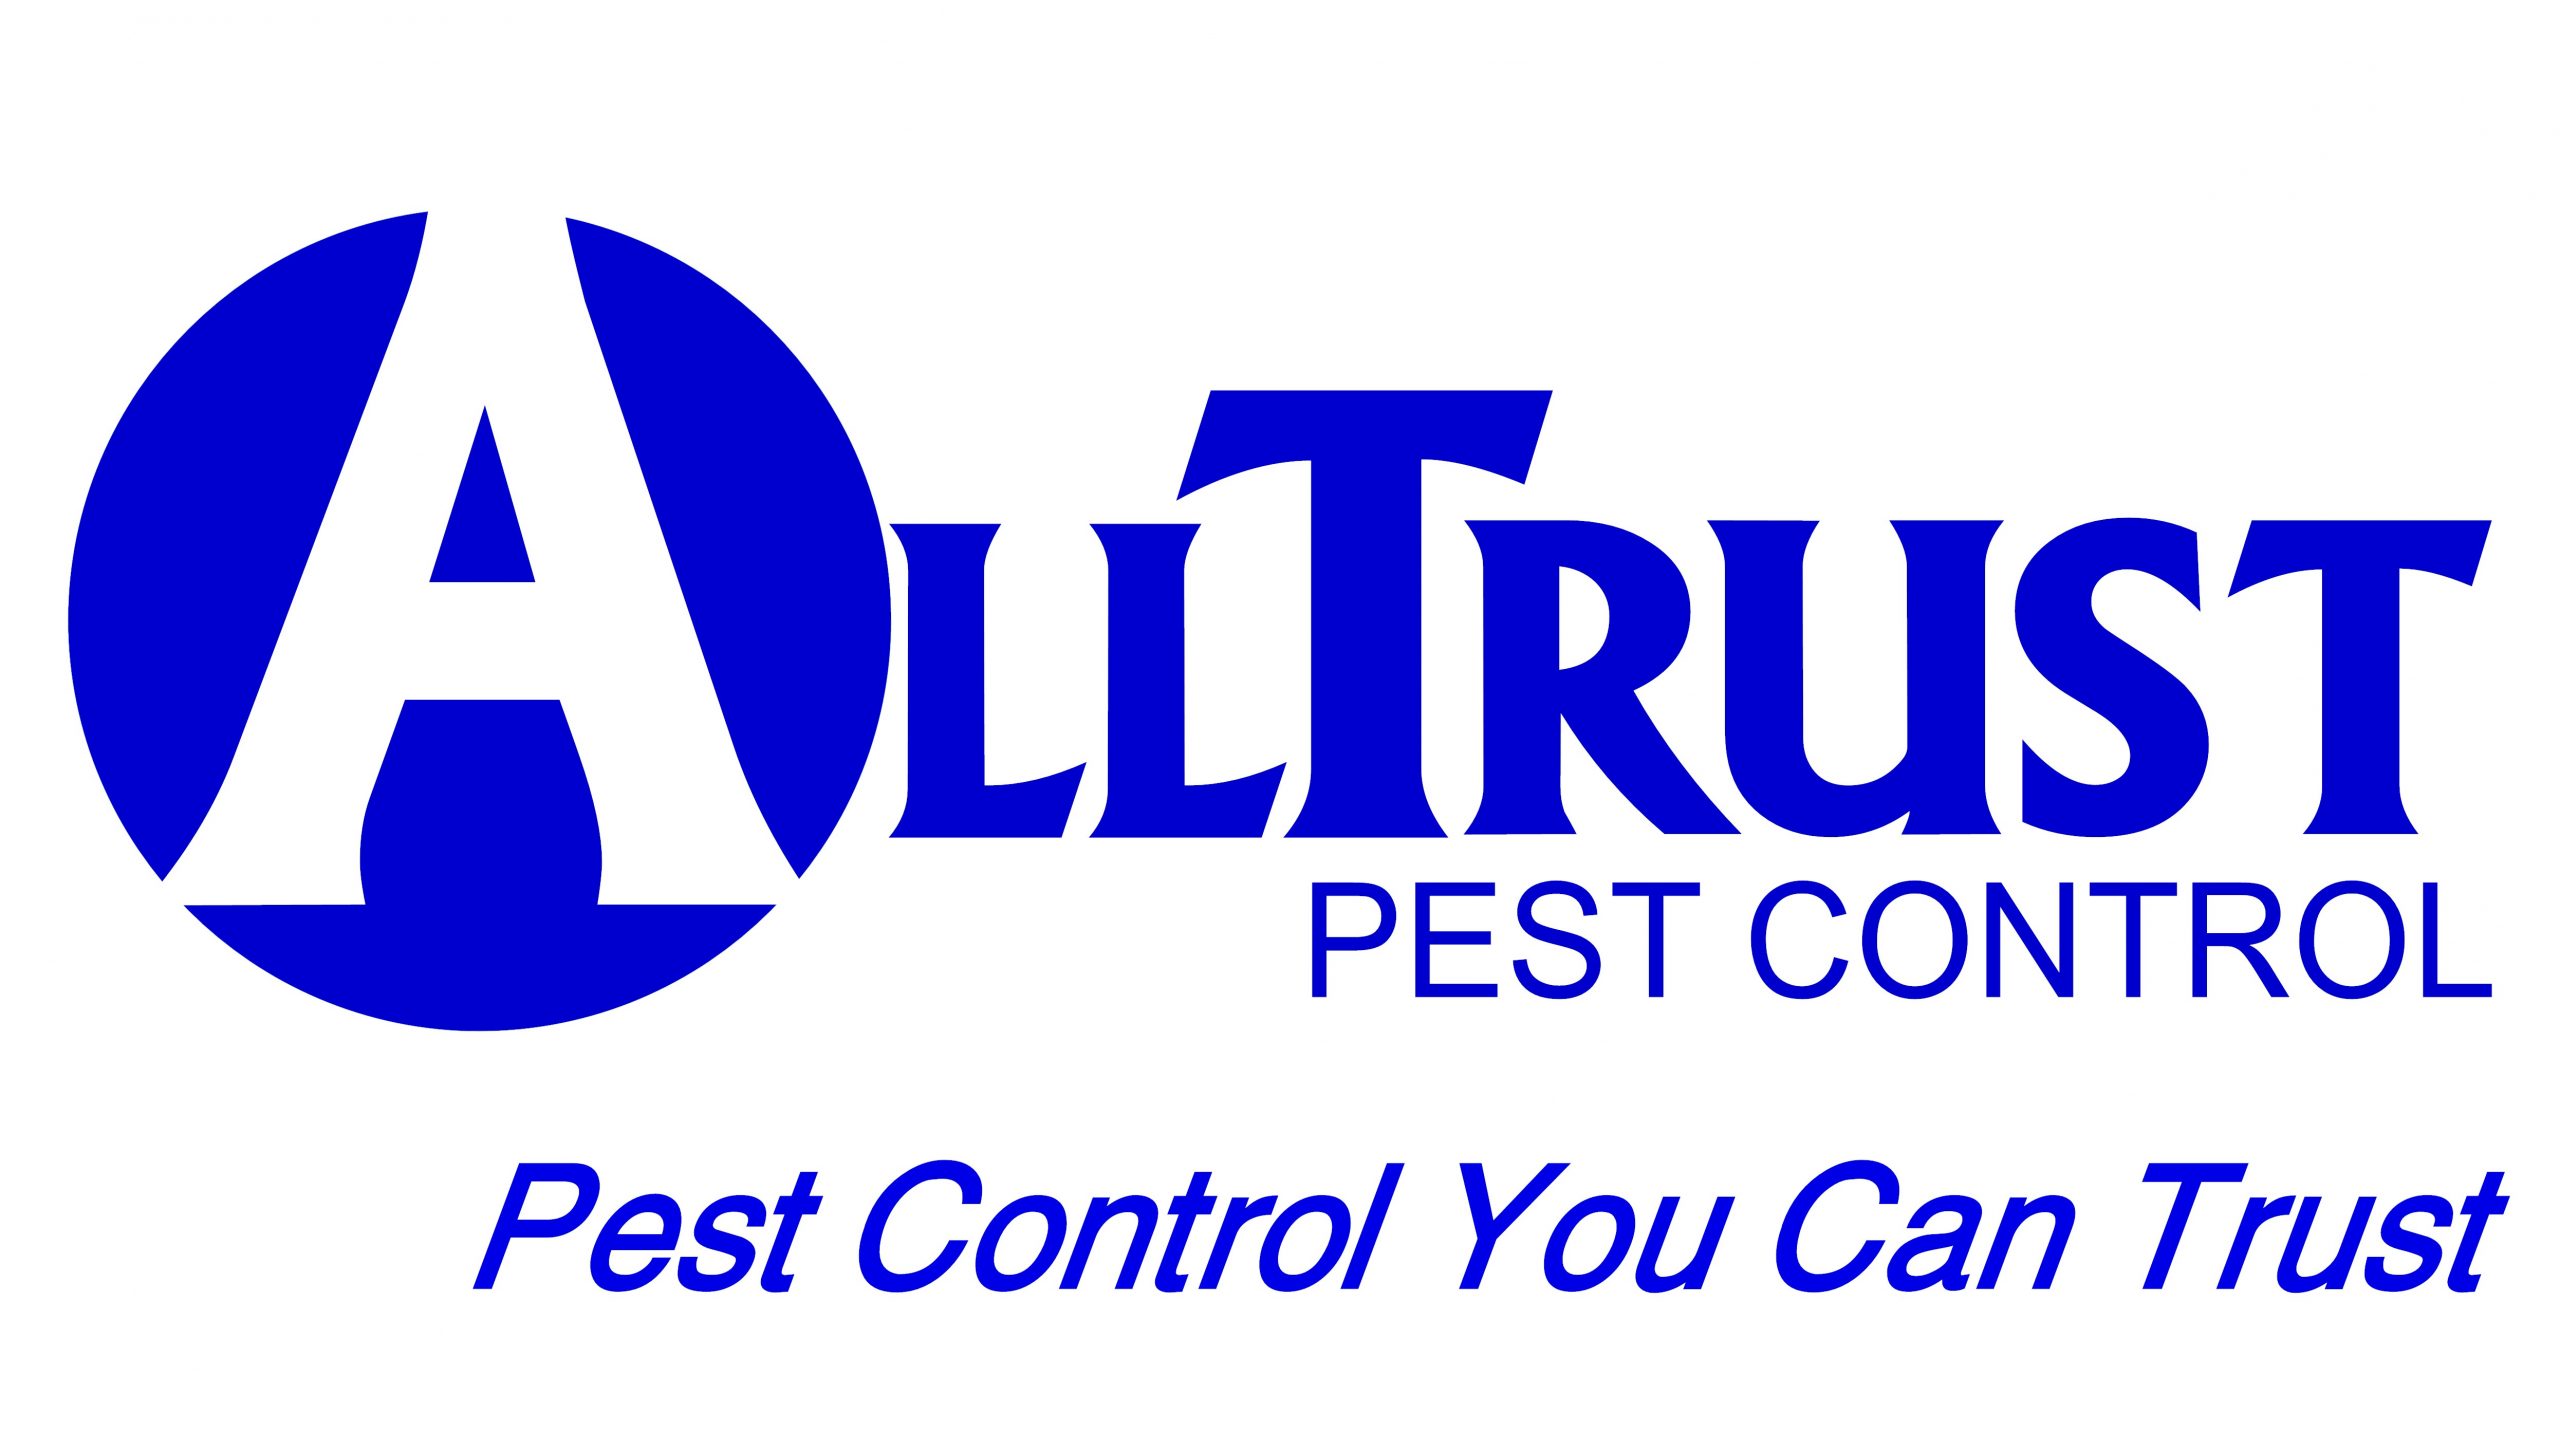 Pest Control You Can Trust